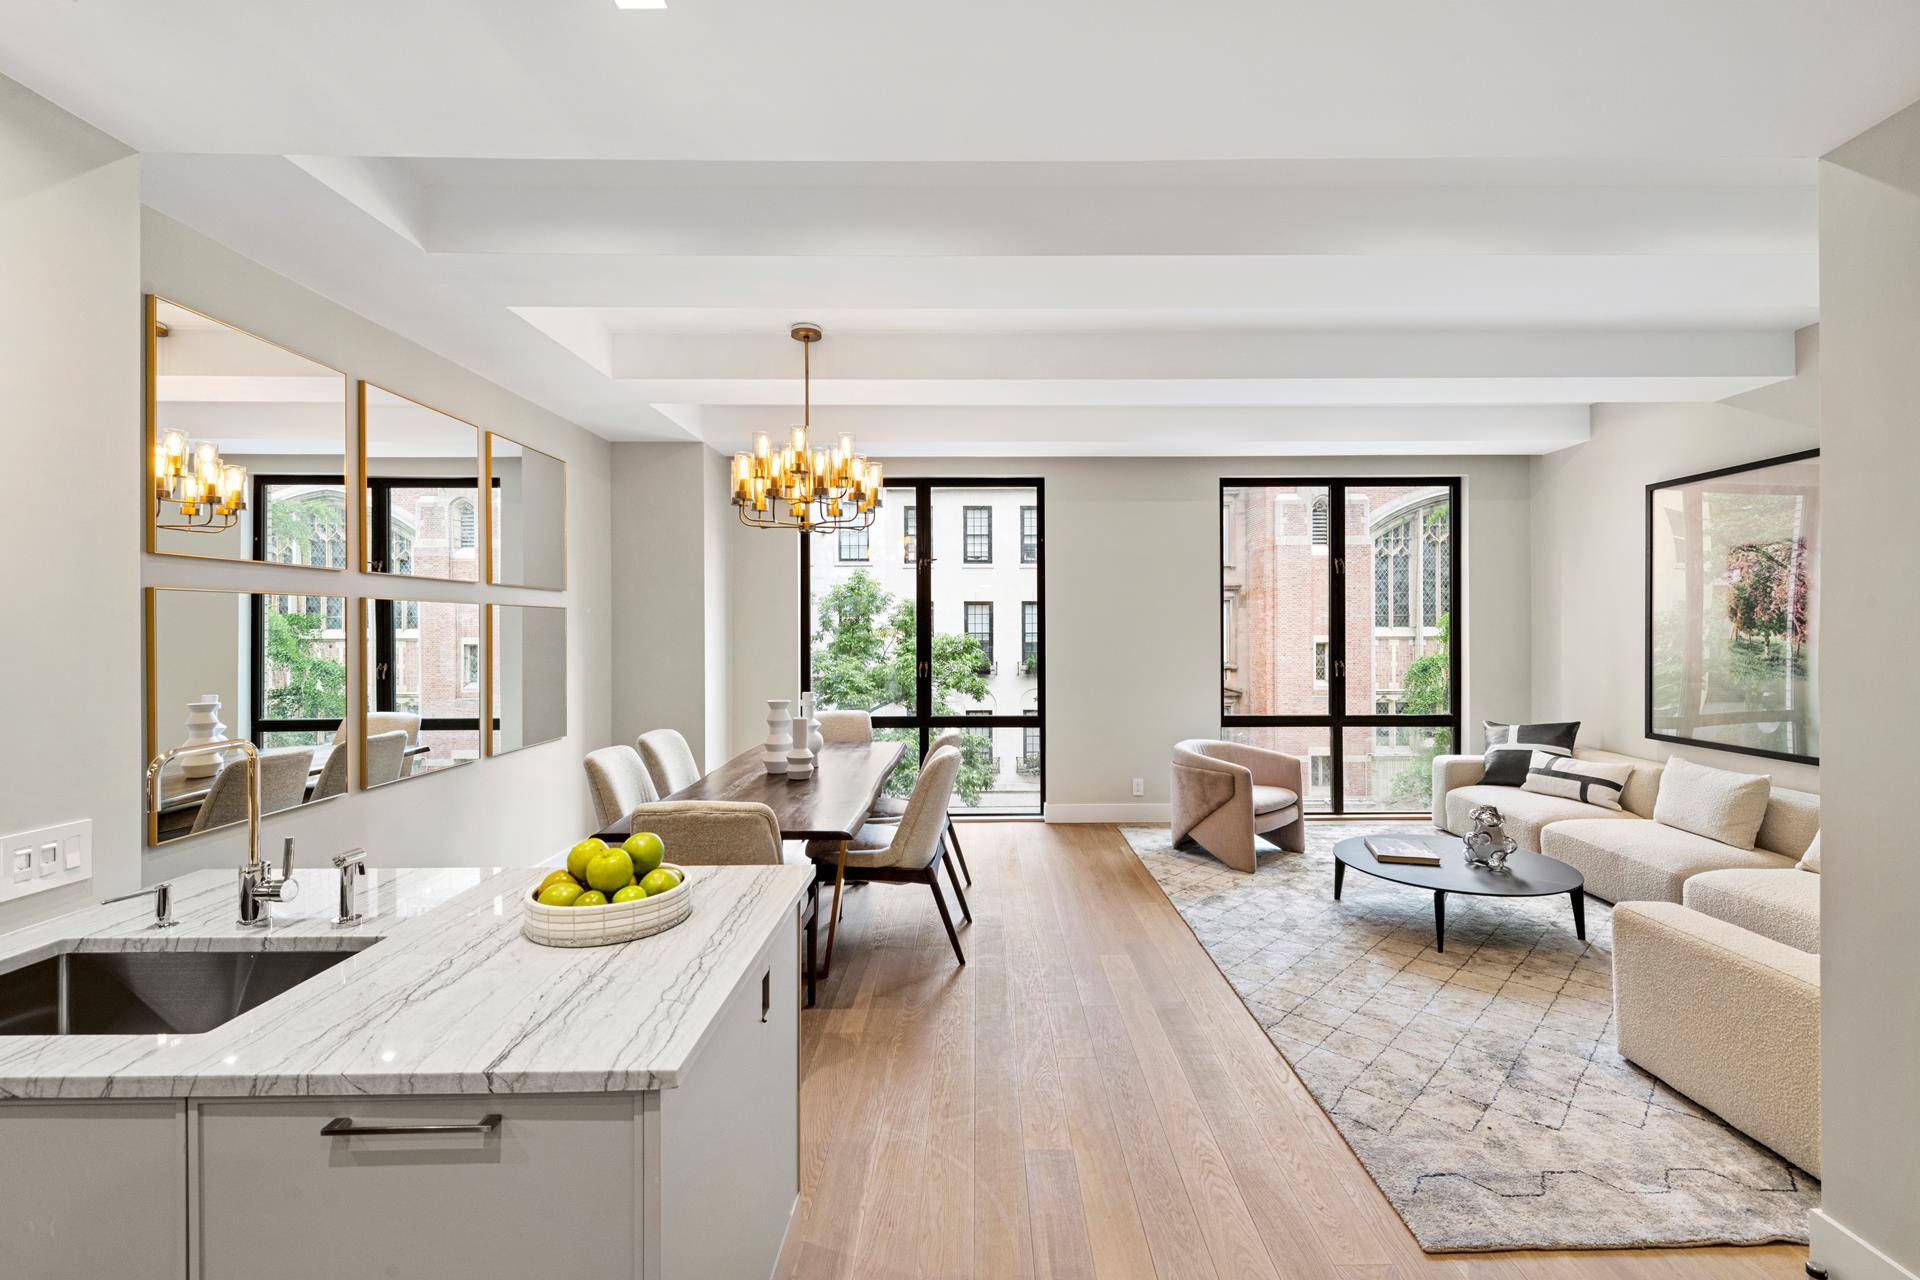 THB at 163 East 62nd is a rare opportunity to own a remarkable, and ideally laid out townhouse with all of the benefits and conveniences of a full service condominium, ...